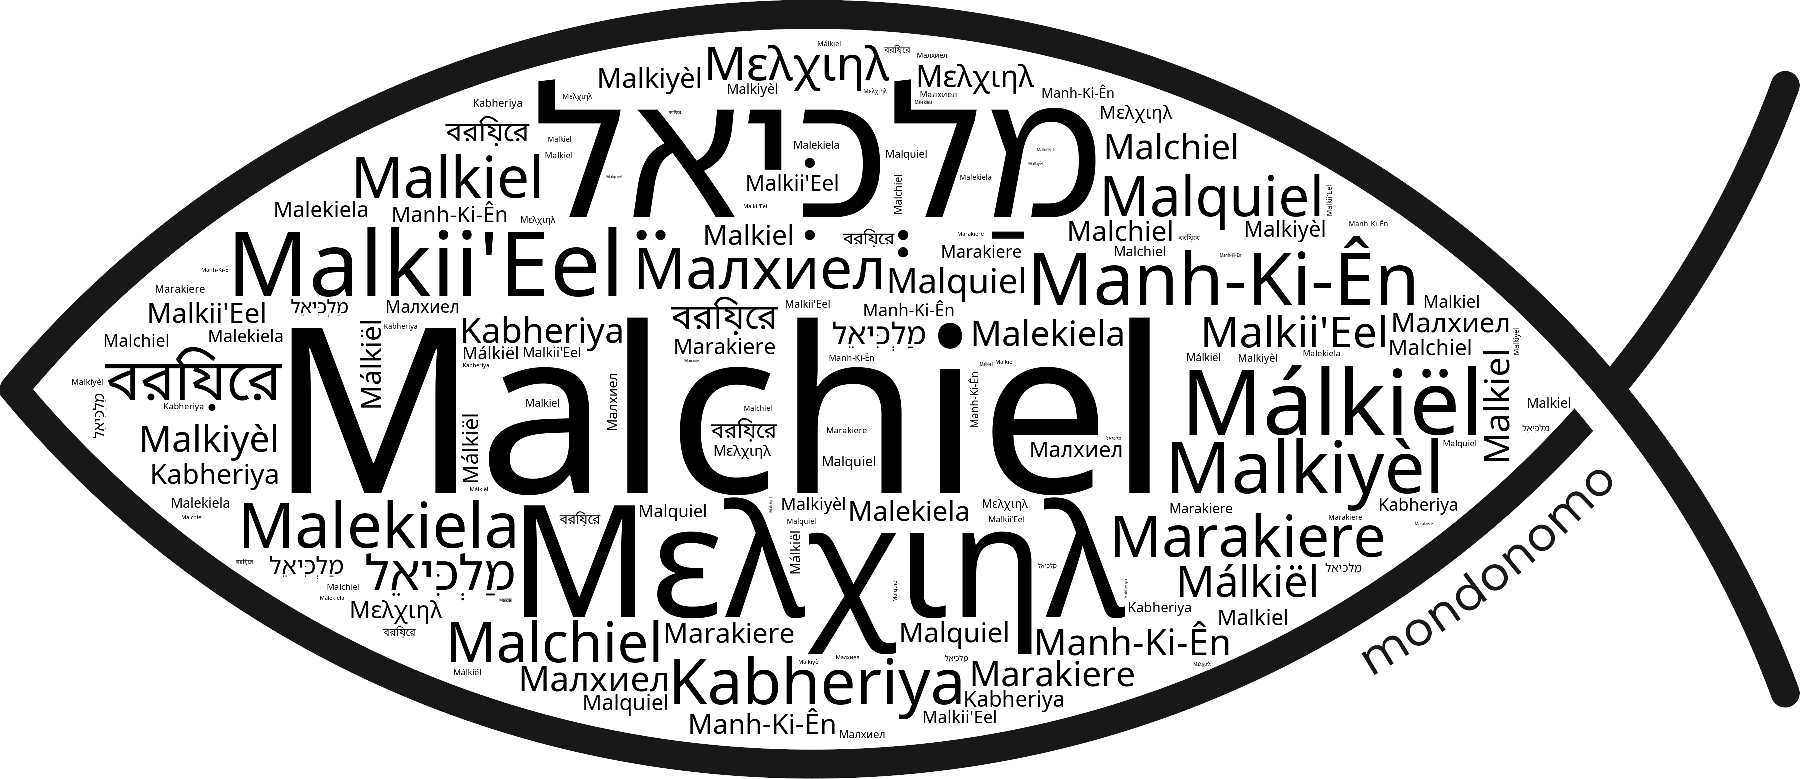 Name Malchiel in the world's Bibles